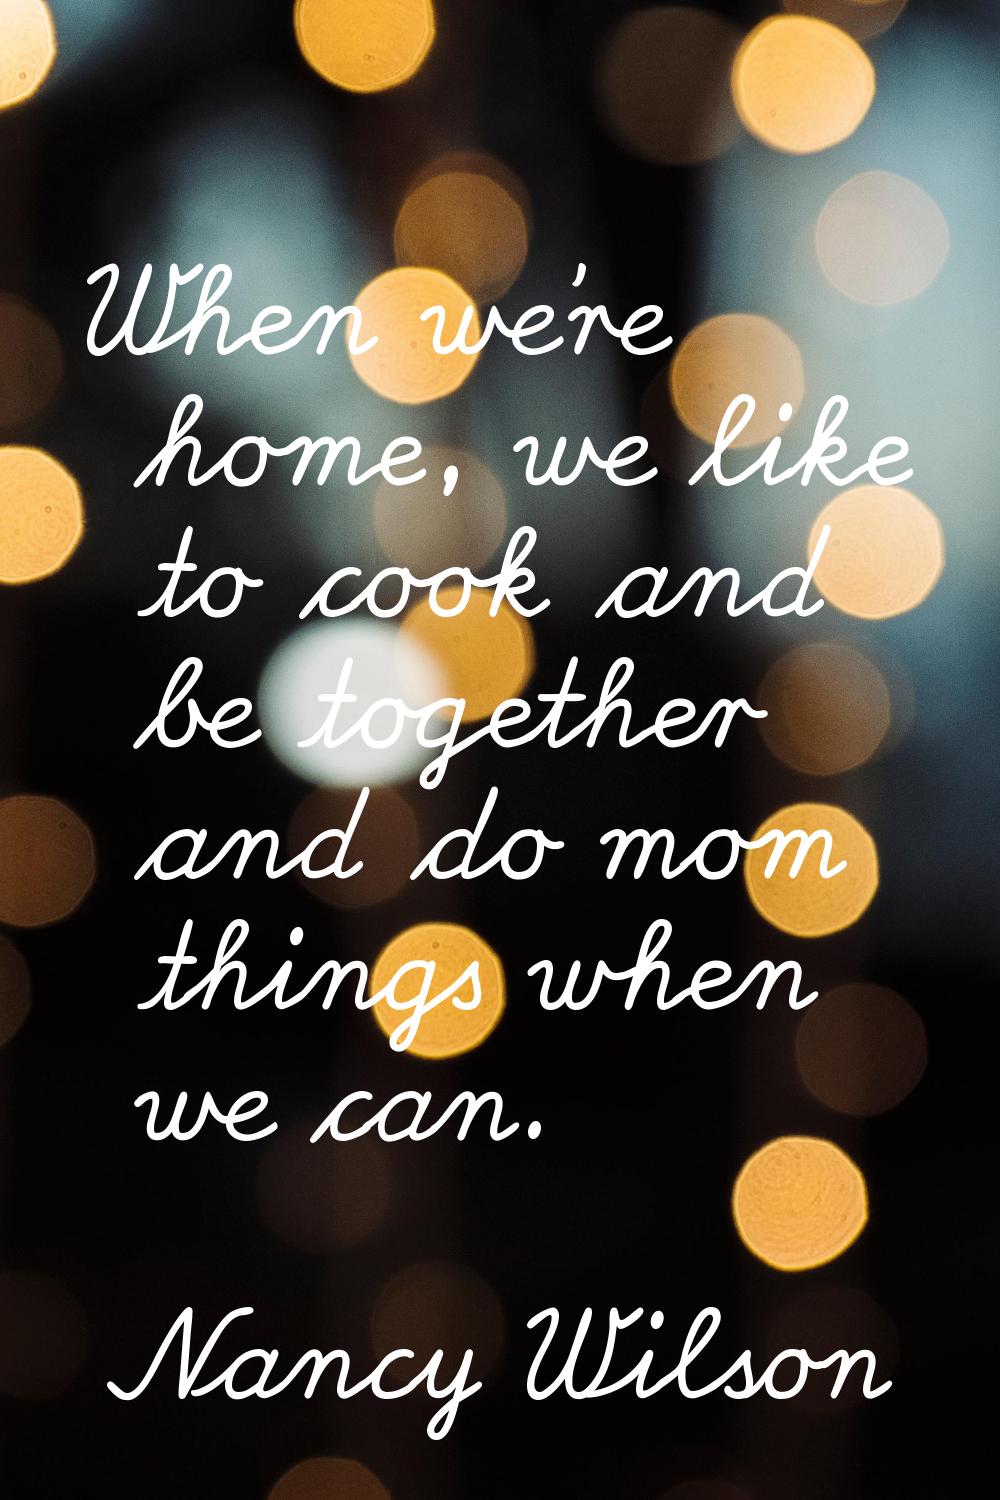 When we're home, we like to cook and be together and do mom things when we can.